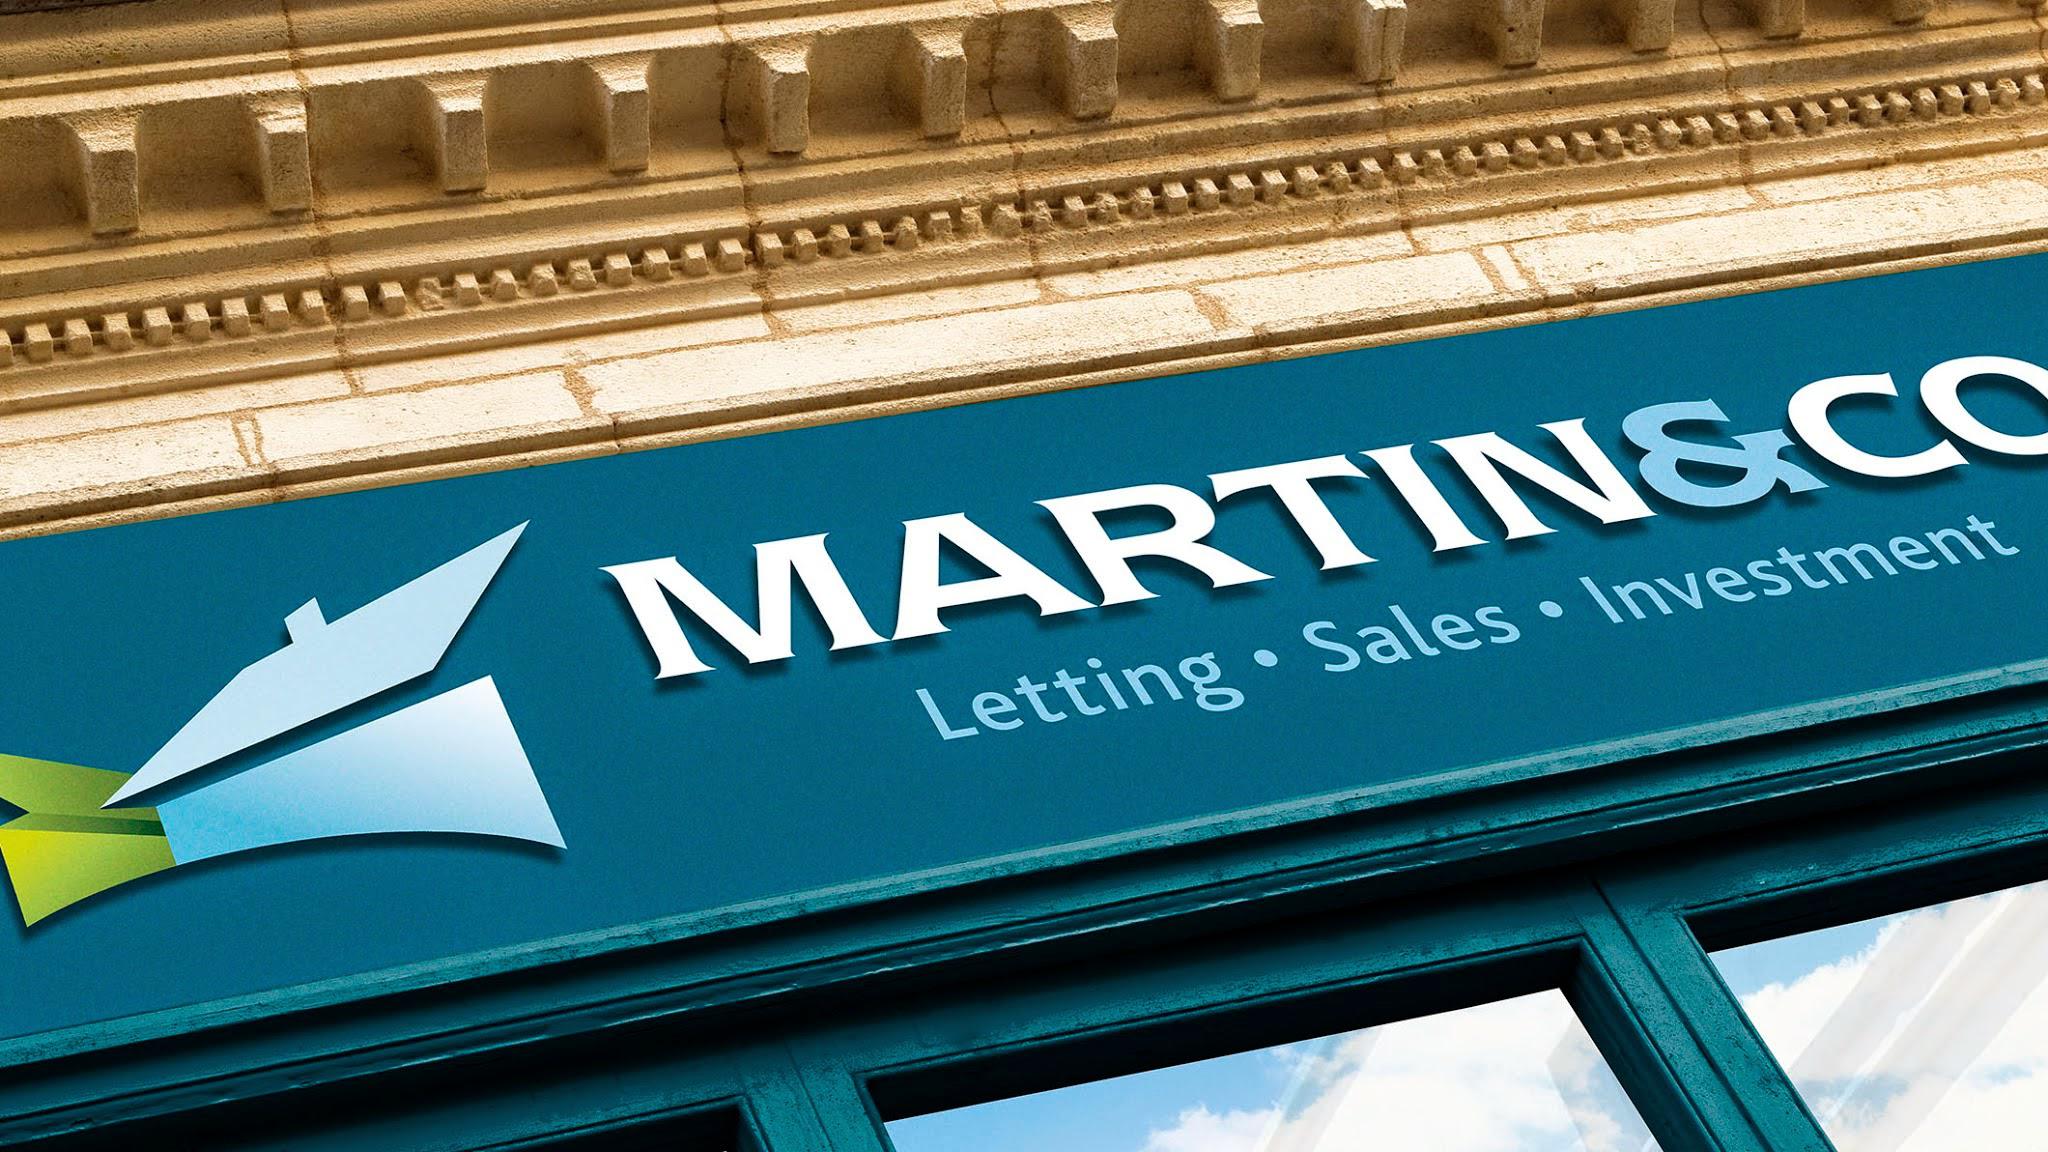 Images Martin & Co Newport Lettings & Estate Agents